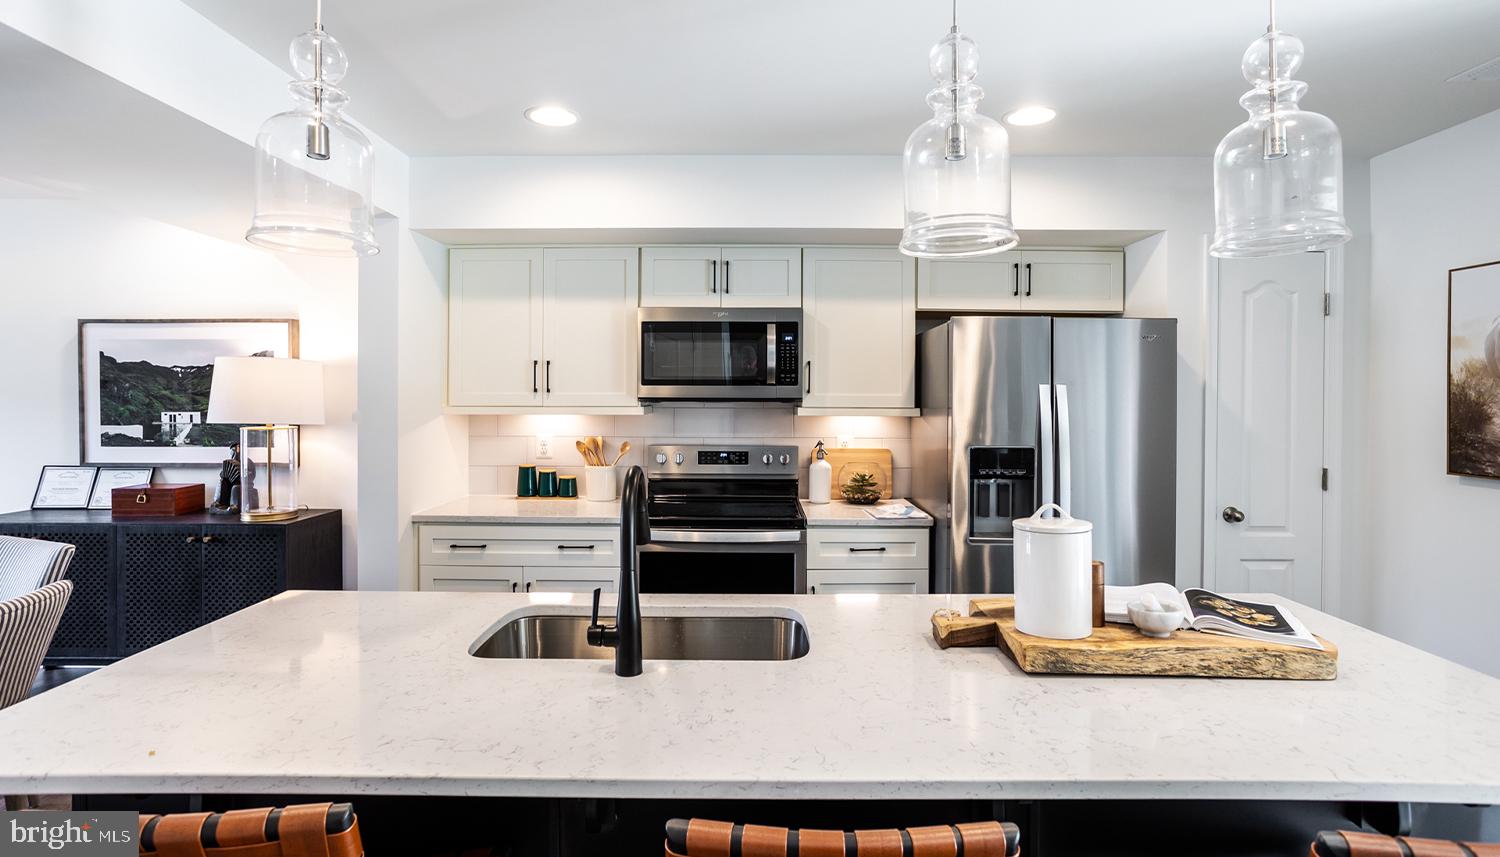 a kitchen with stainless steel appliances kitchen island granite countertop a sink refrigerator and microwave